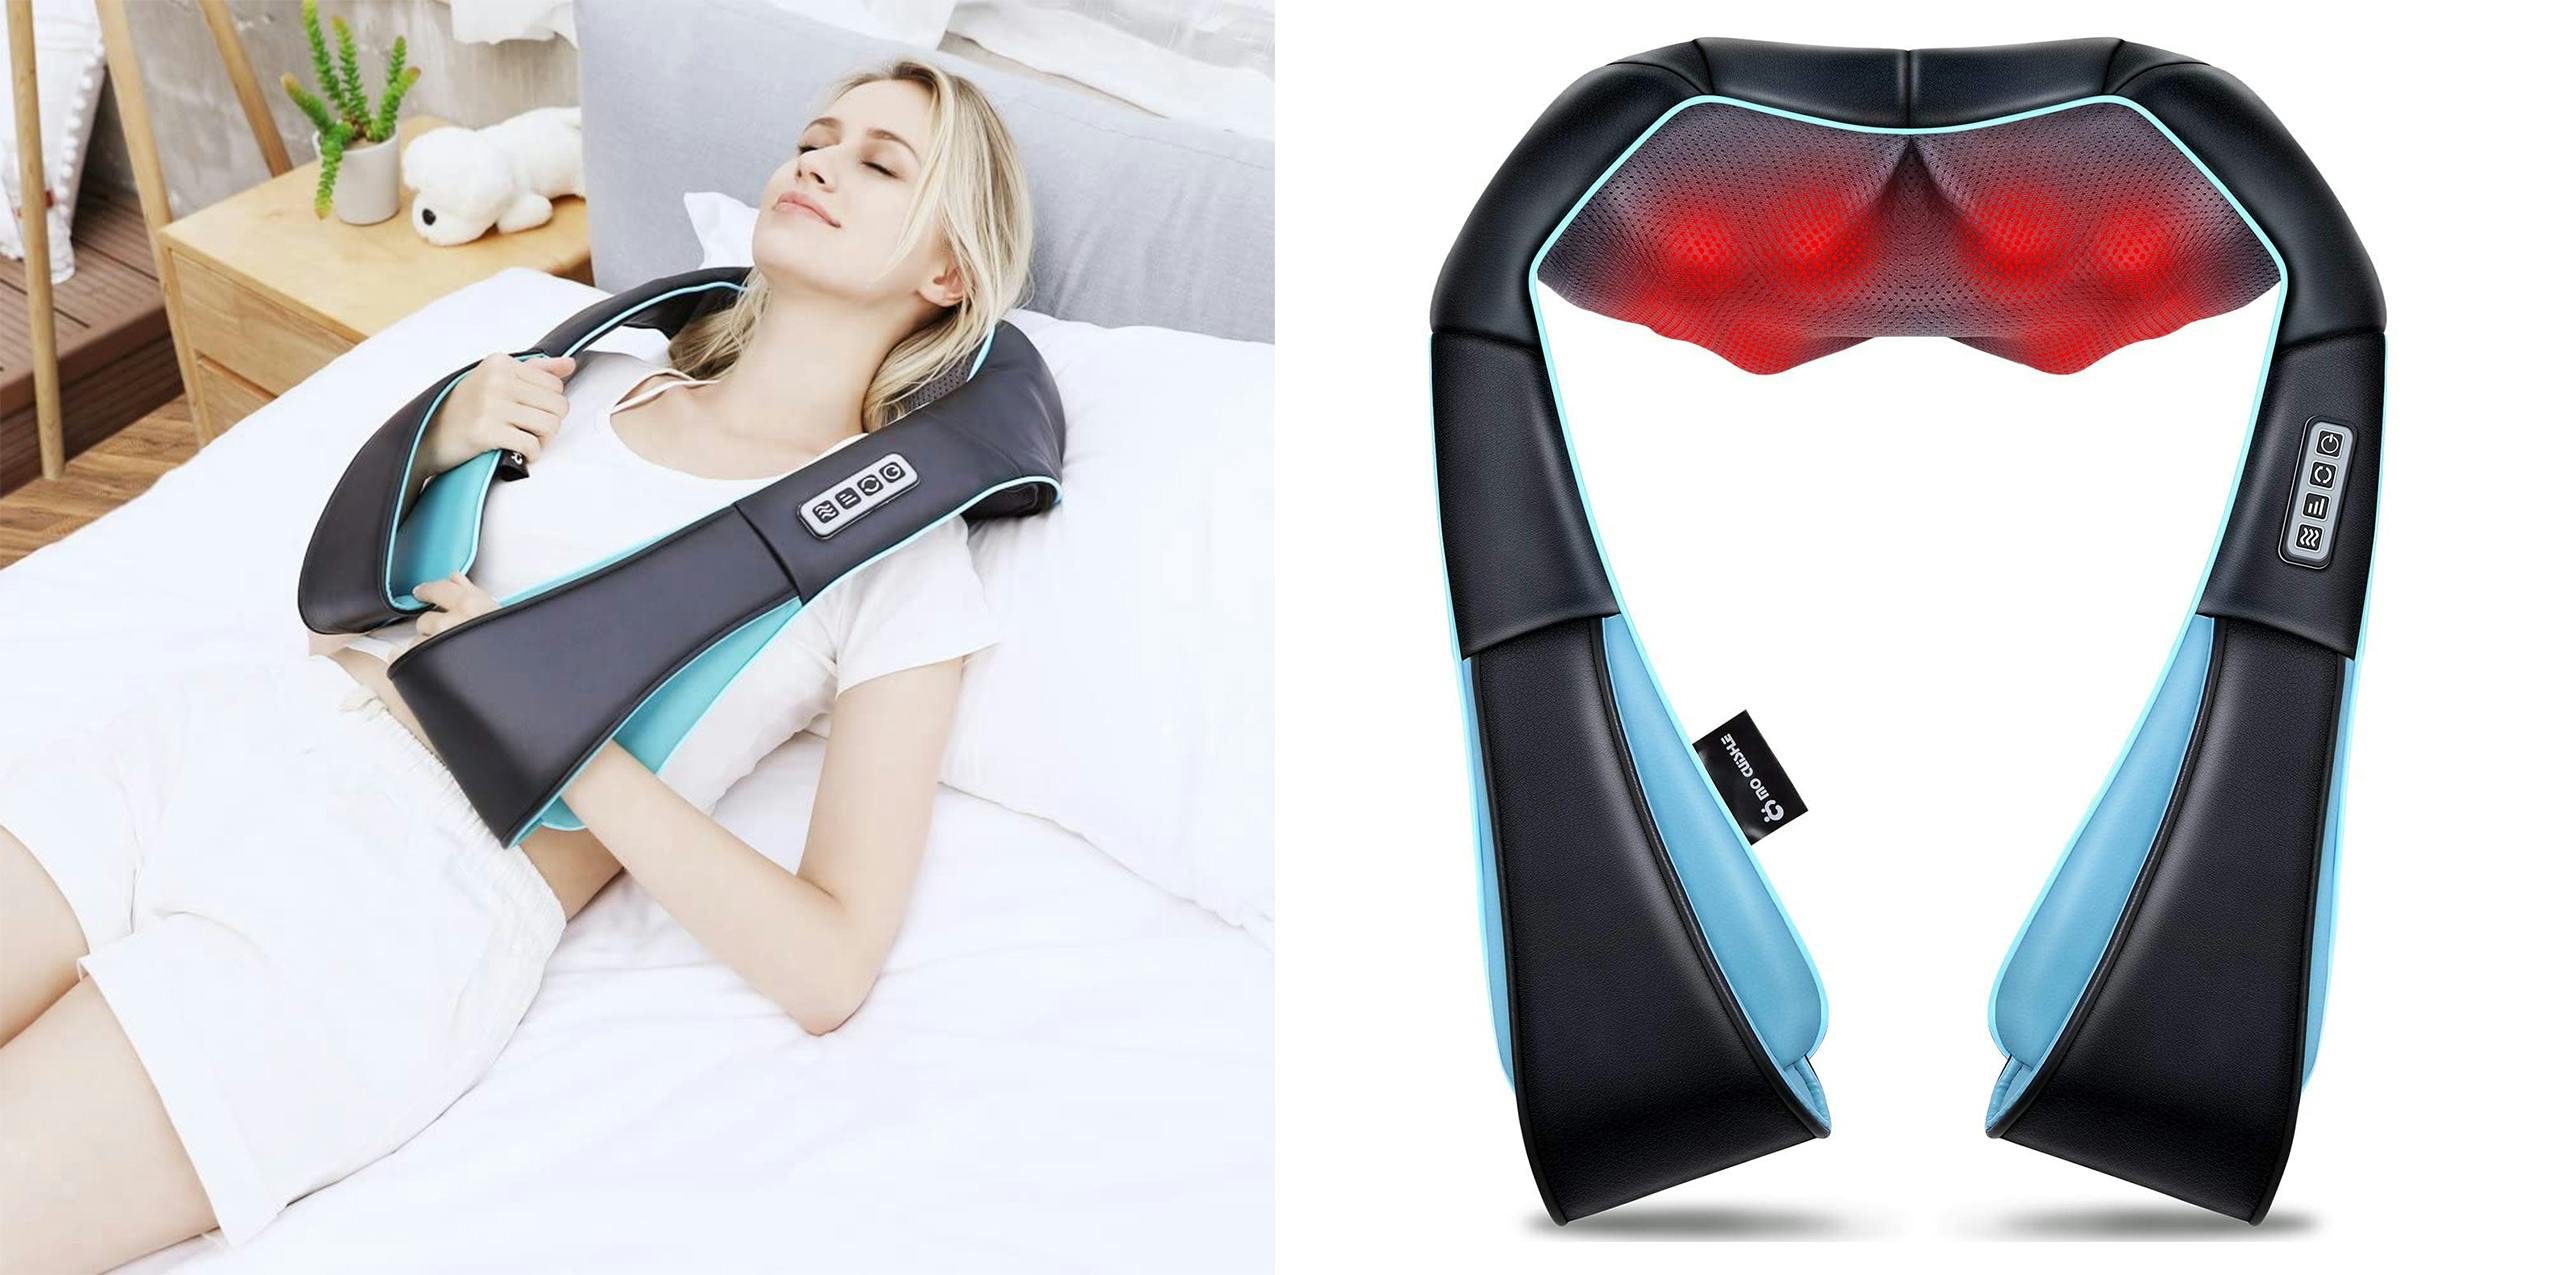 A woman wearing an electronic Shiatsu massager with a picture of its product.